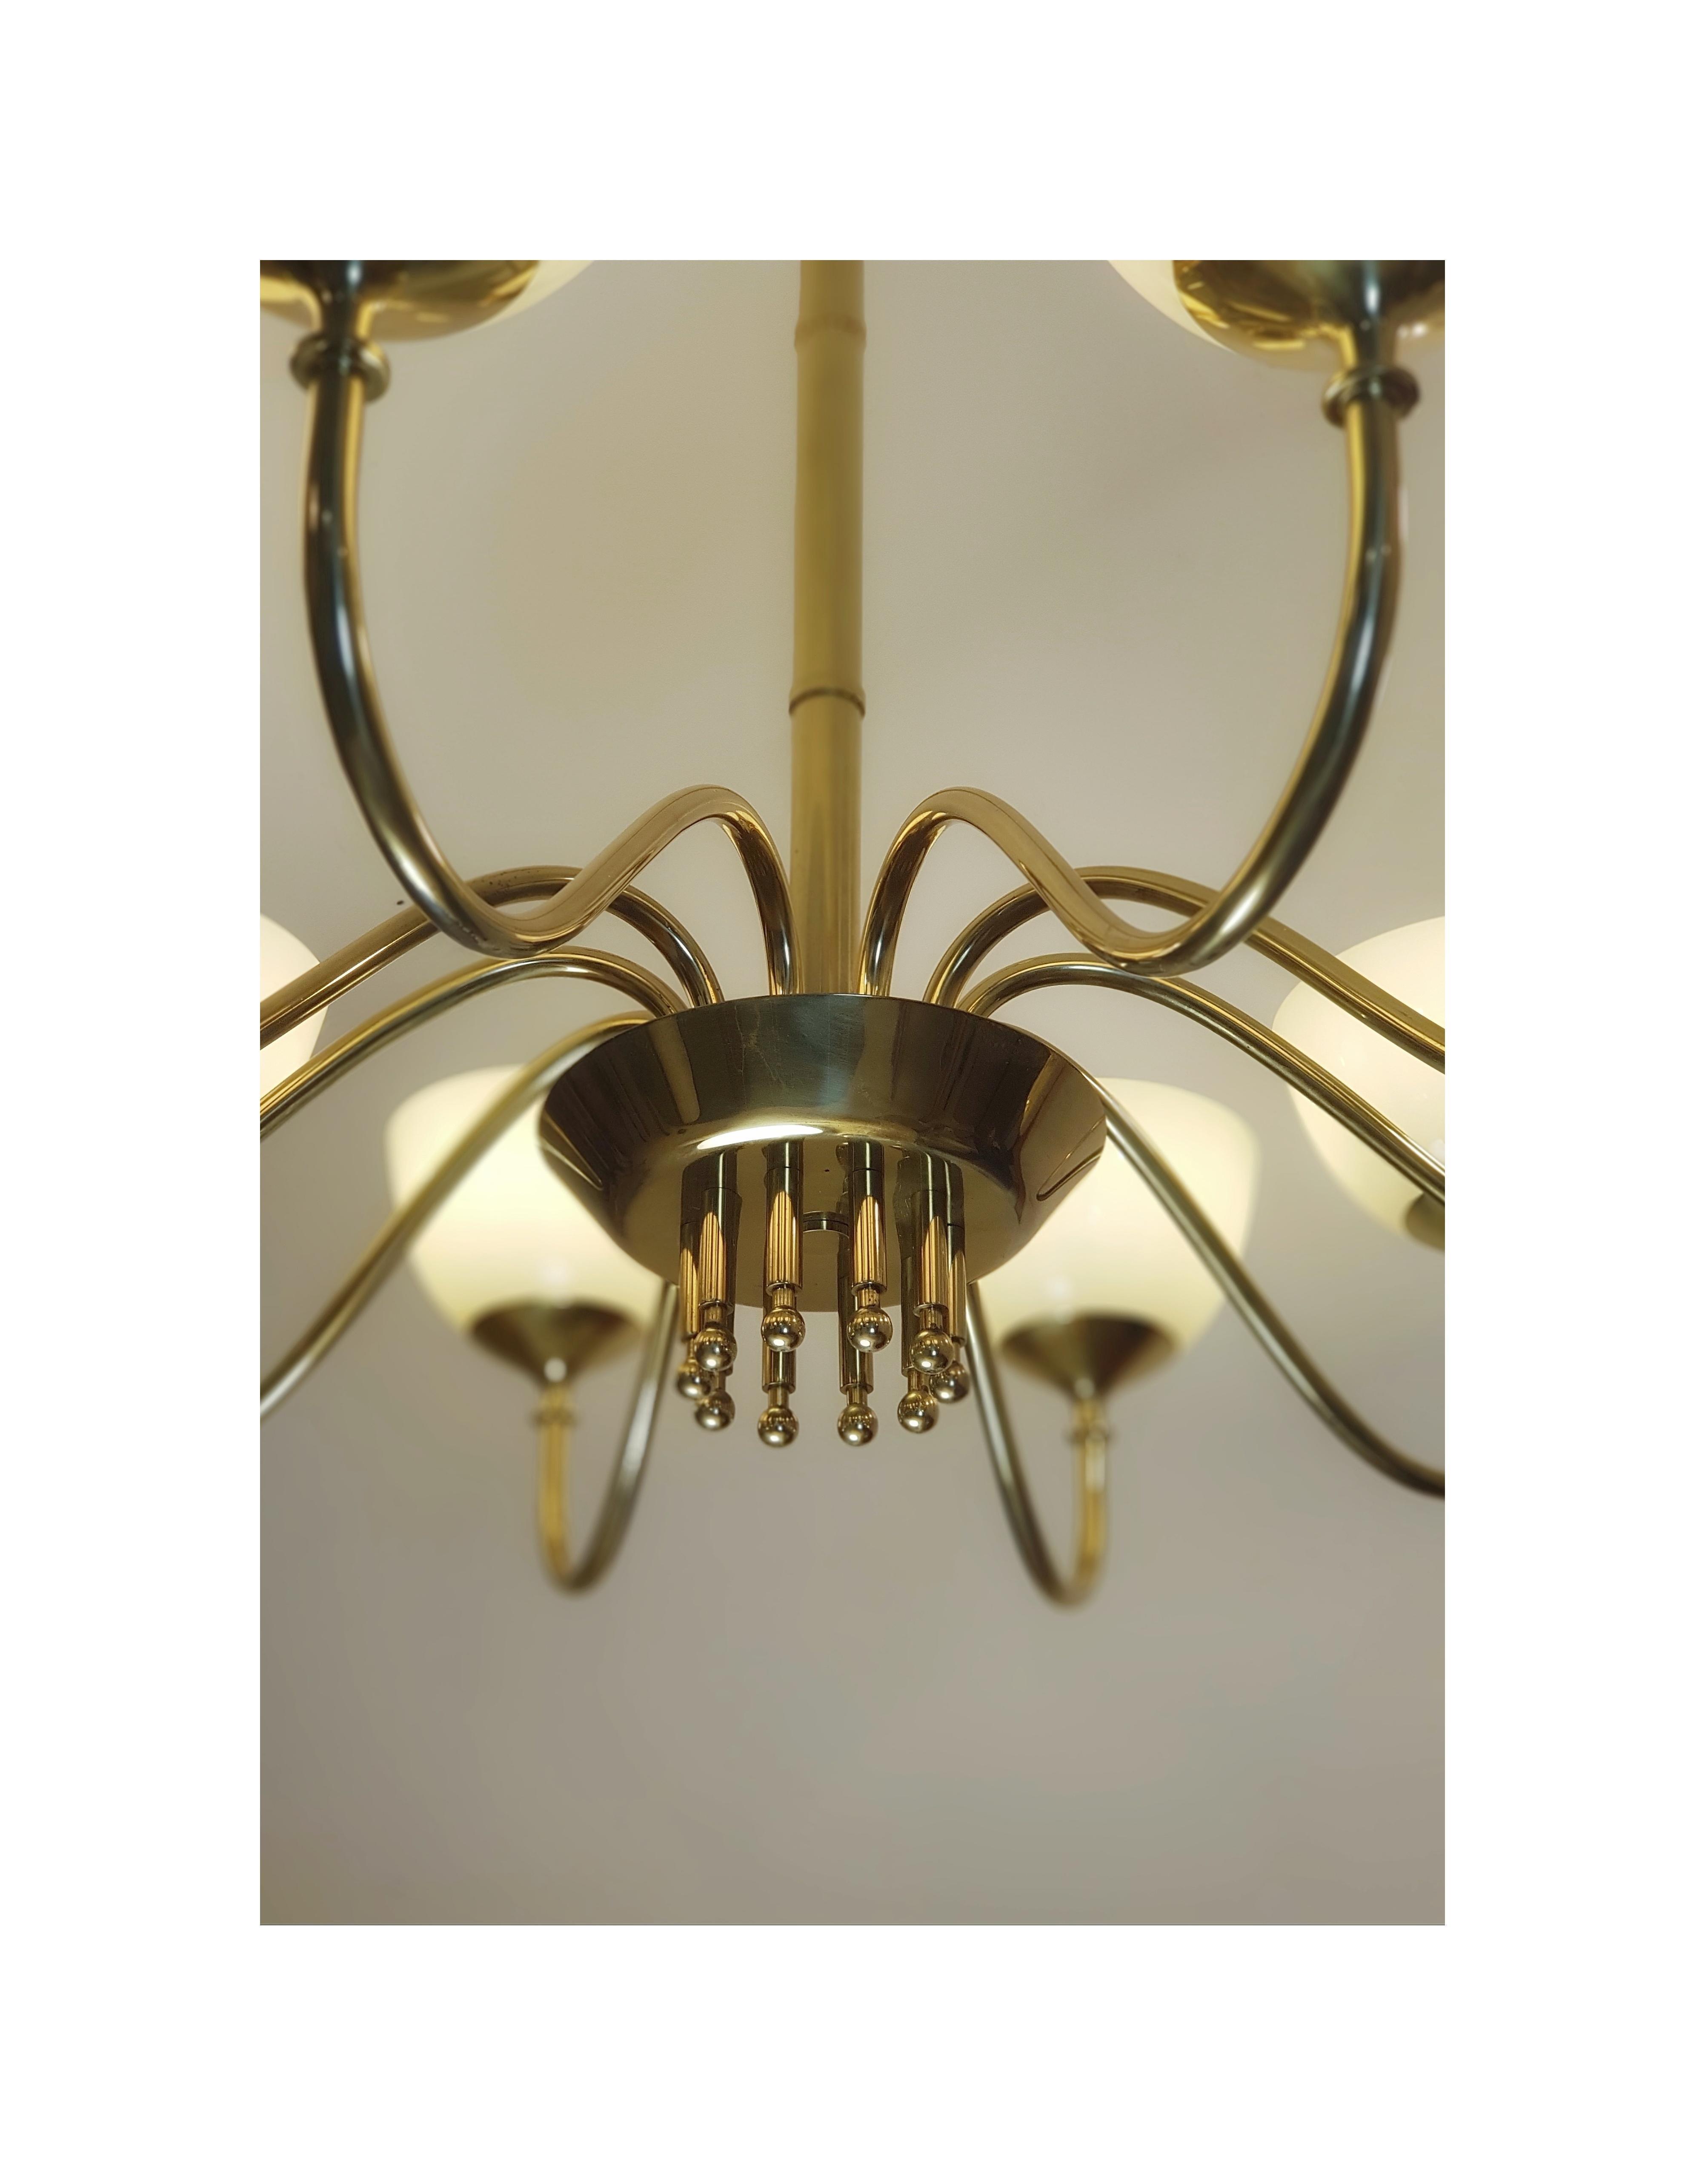 Finnish Monumental Paavo Tynell chandelier, Oy Taito Ab 1952